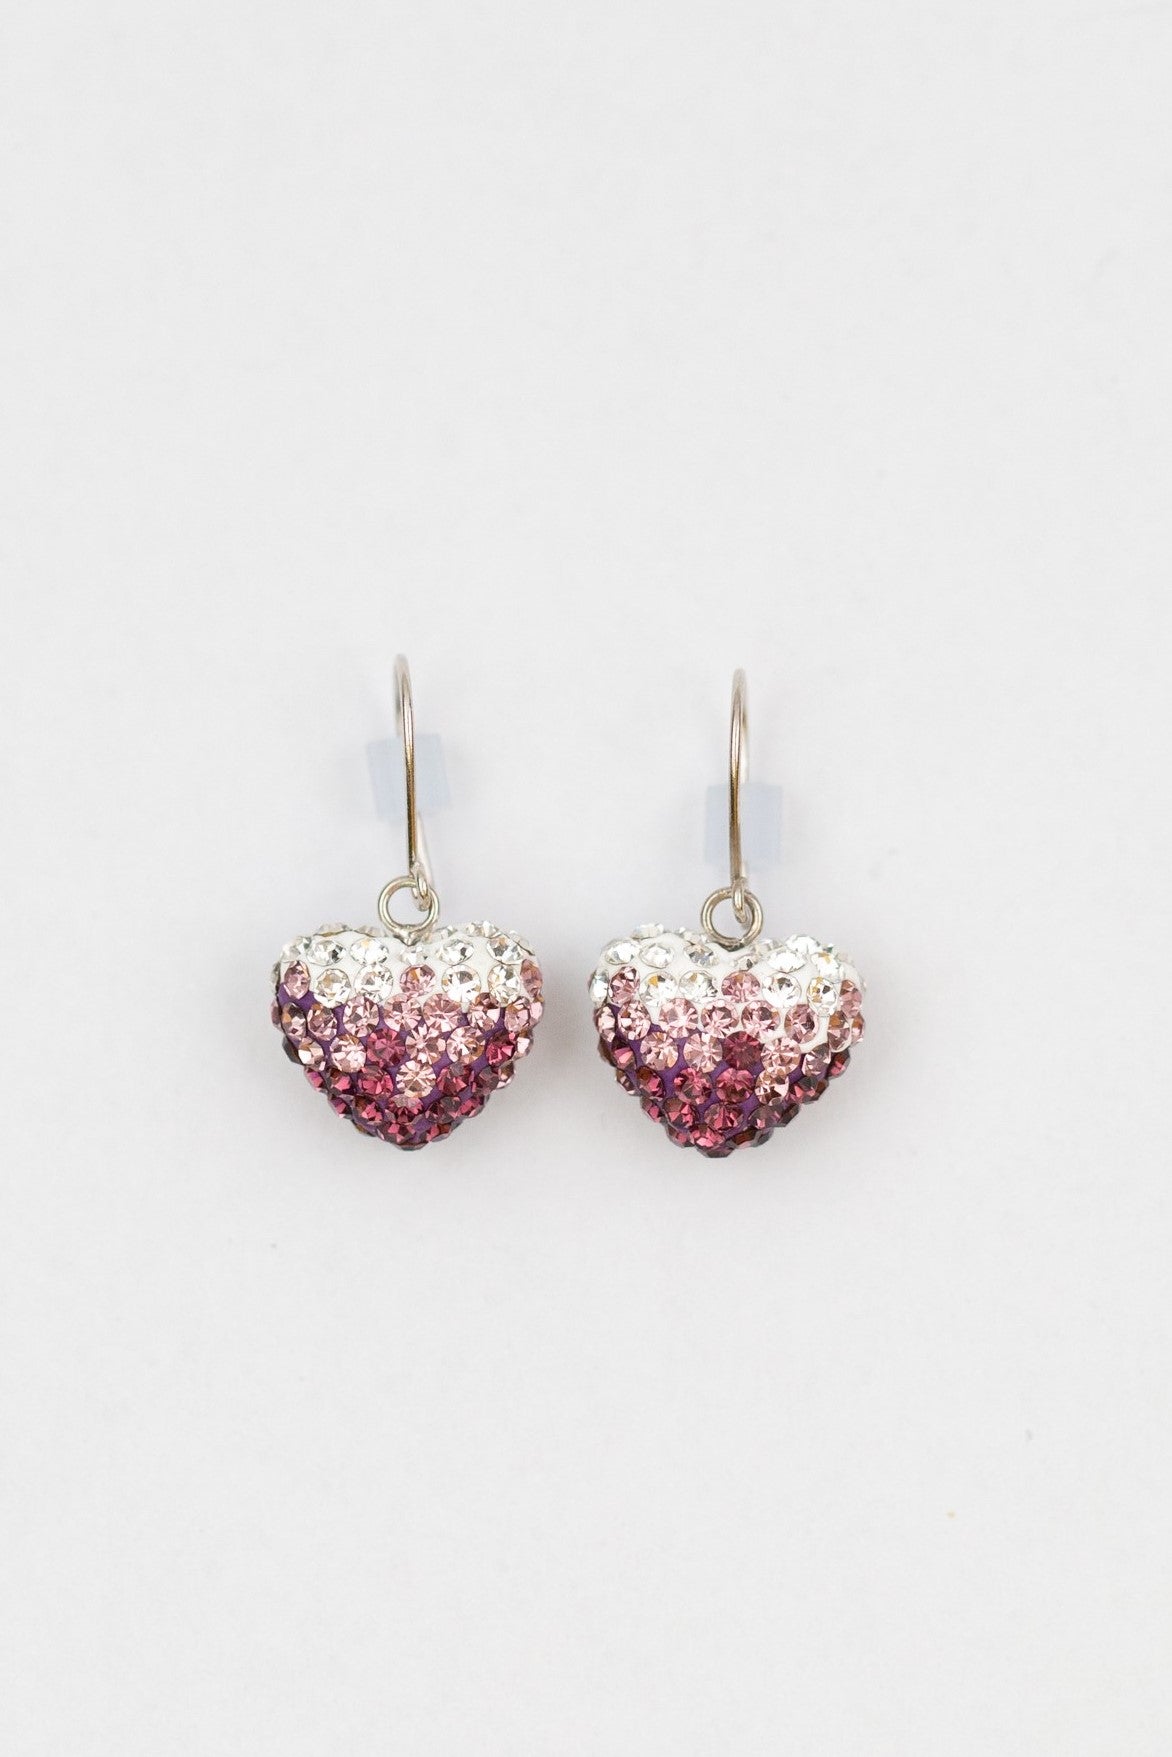 Crystal Pave Ombre Heart Dangling Silver Earrings in Amethyst| Annie and Sisters